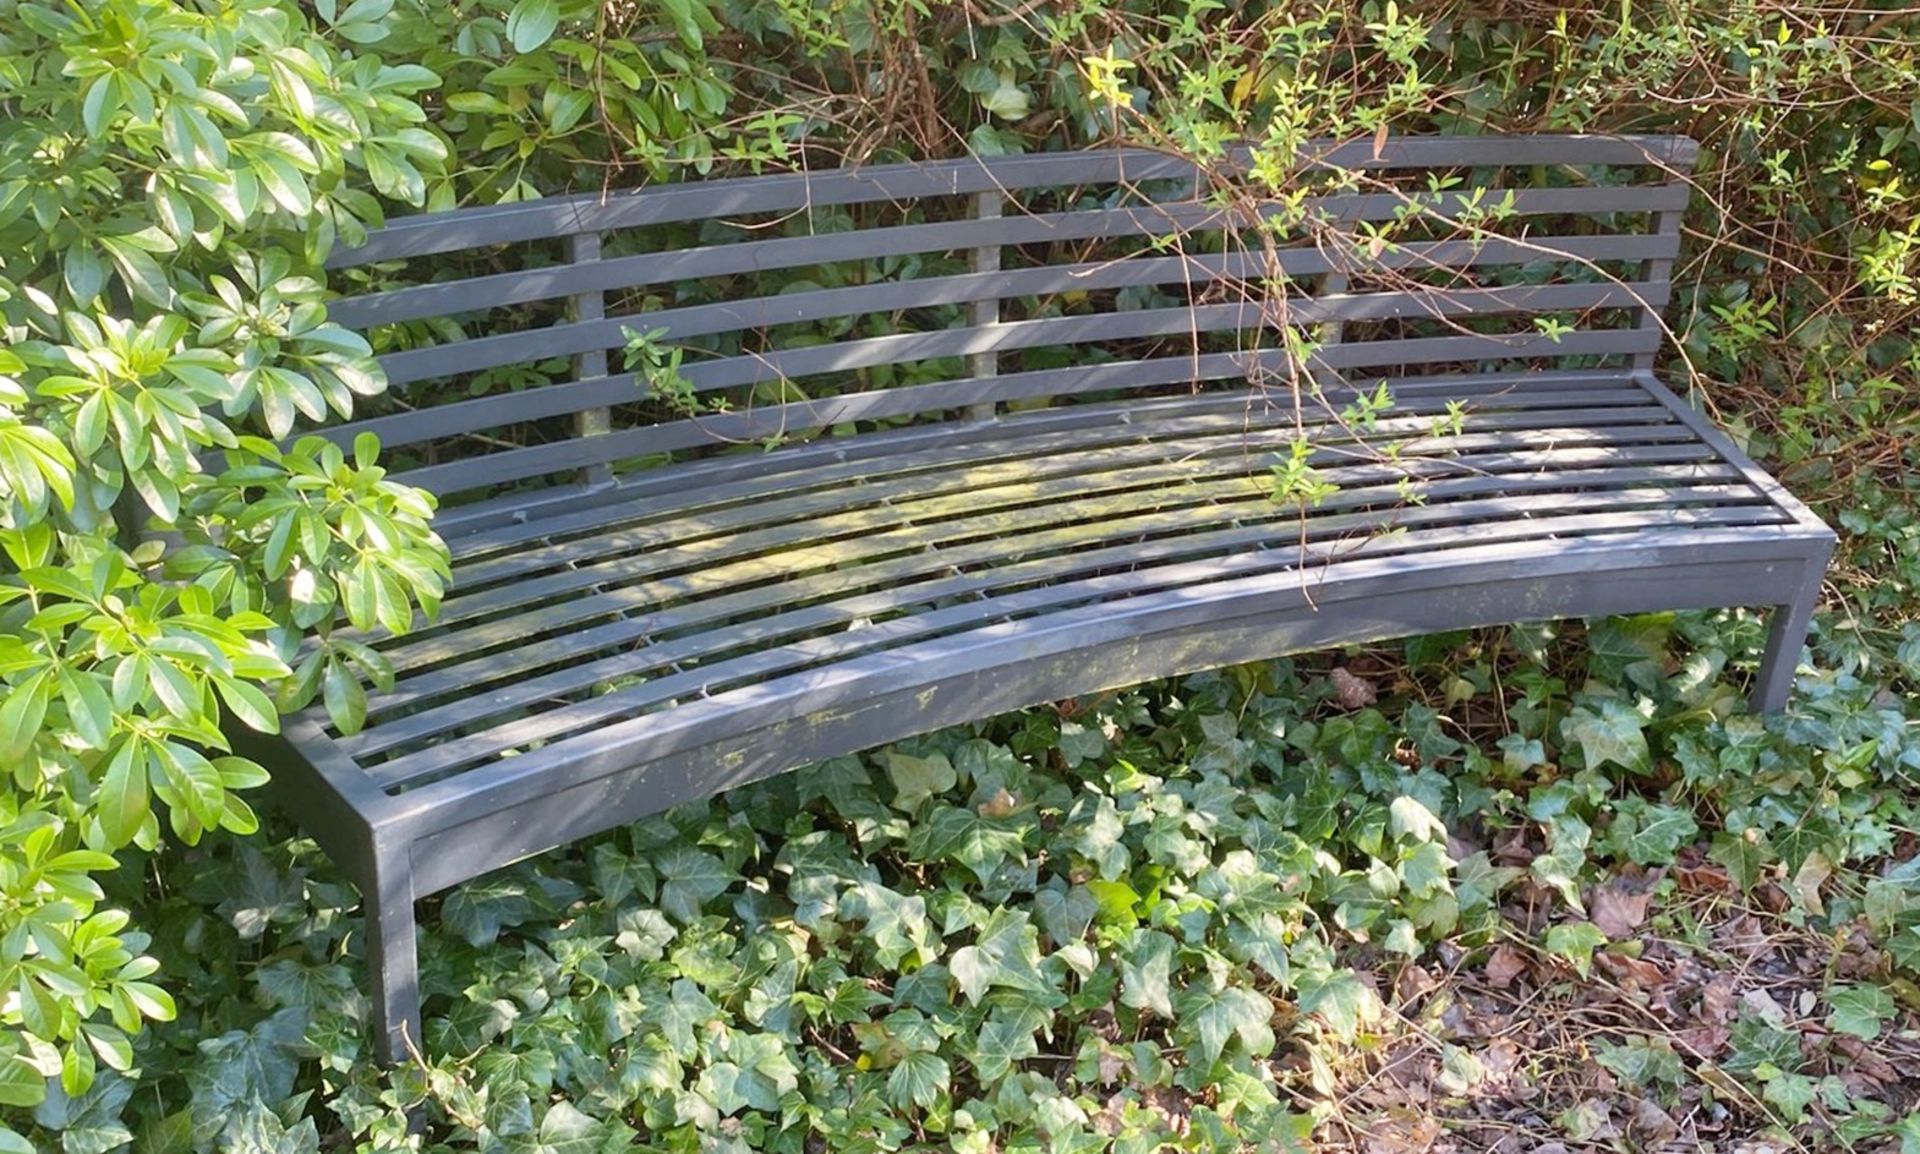 1 x Metal Seating Bench With a Curved Design and Slatted Seats / Backrests - Width: 180cms - Image 2 of 2